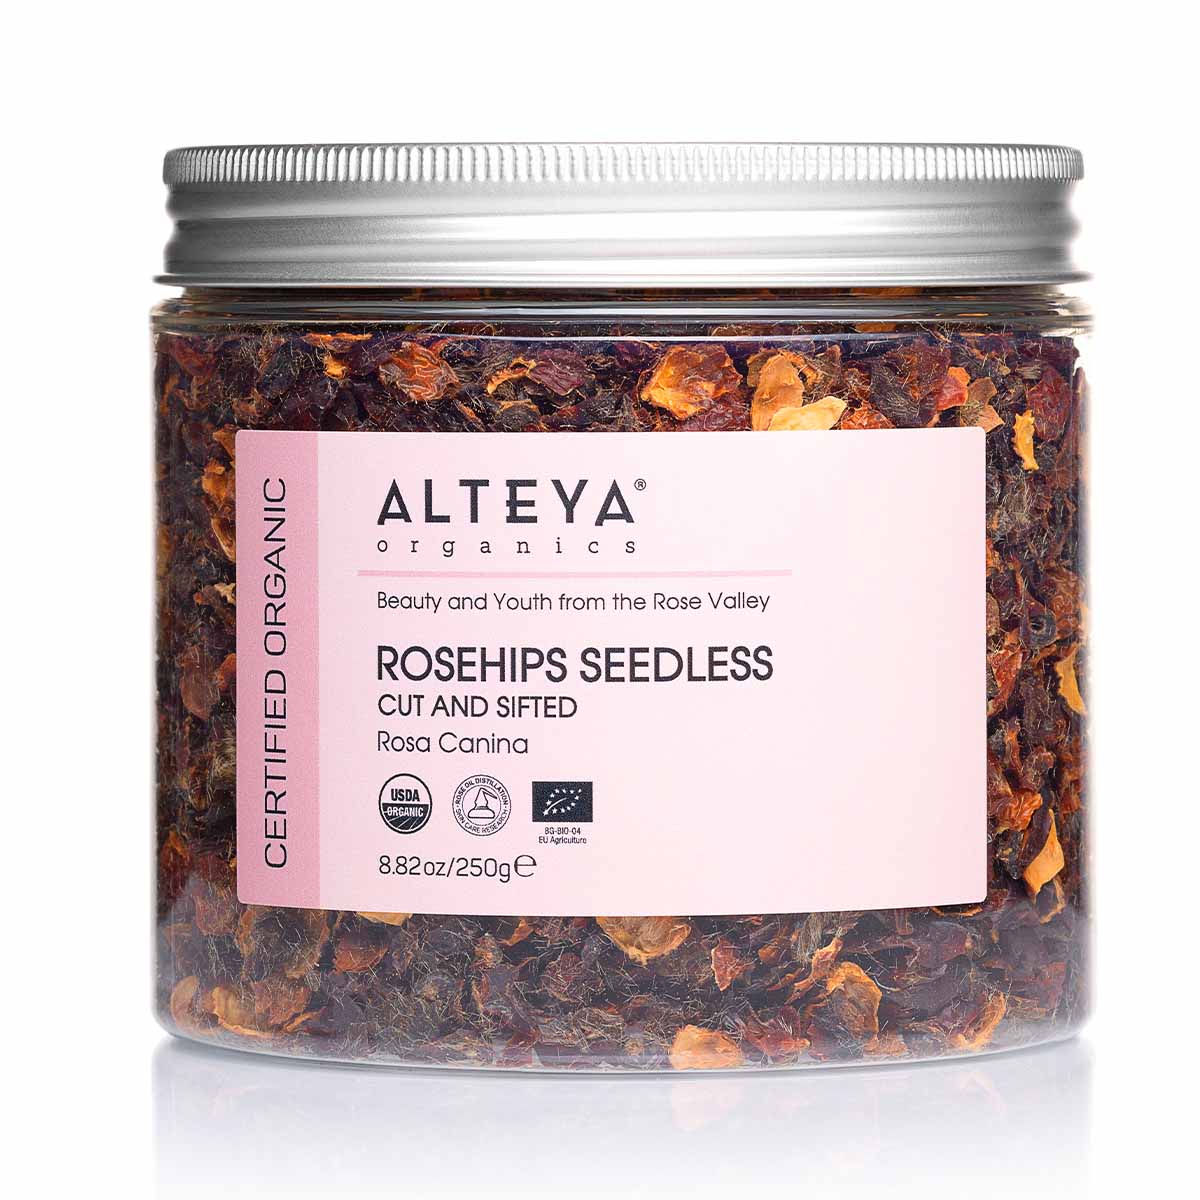 An Alteya Organics organic jar of Rosehips Seedless / Cut and Sifted granola, rich in vitamin C and completely seedless.